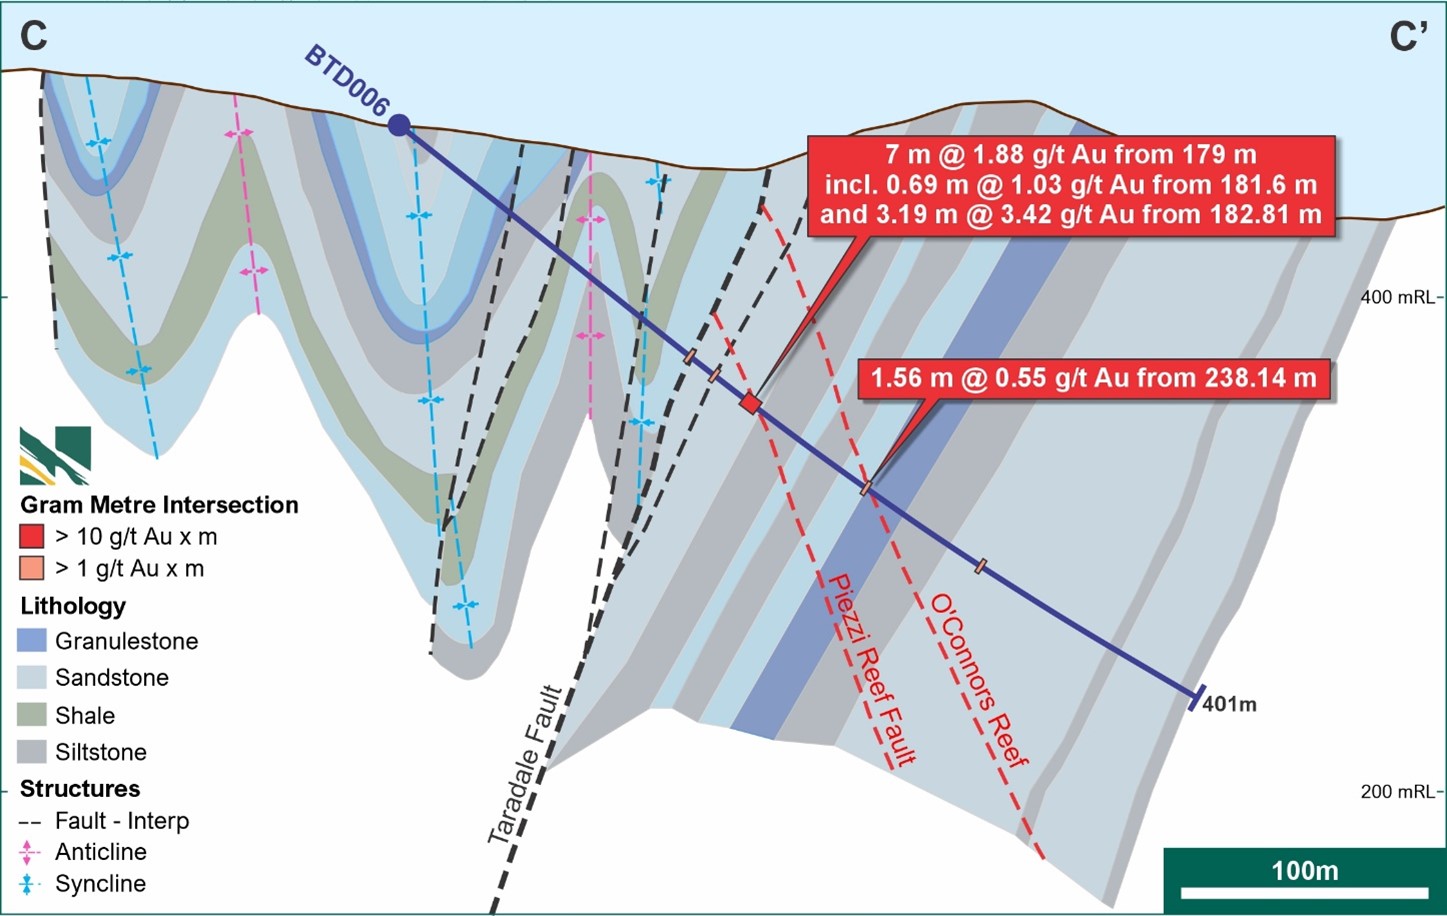 BTD006 on section testing the regionally significant Taradale Fault and associated splay structures. A significant (